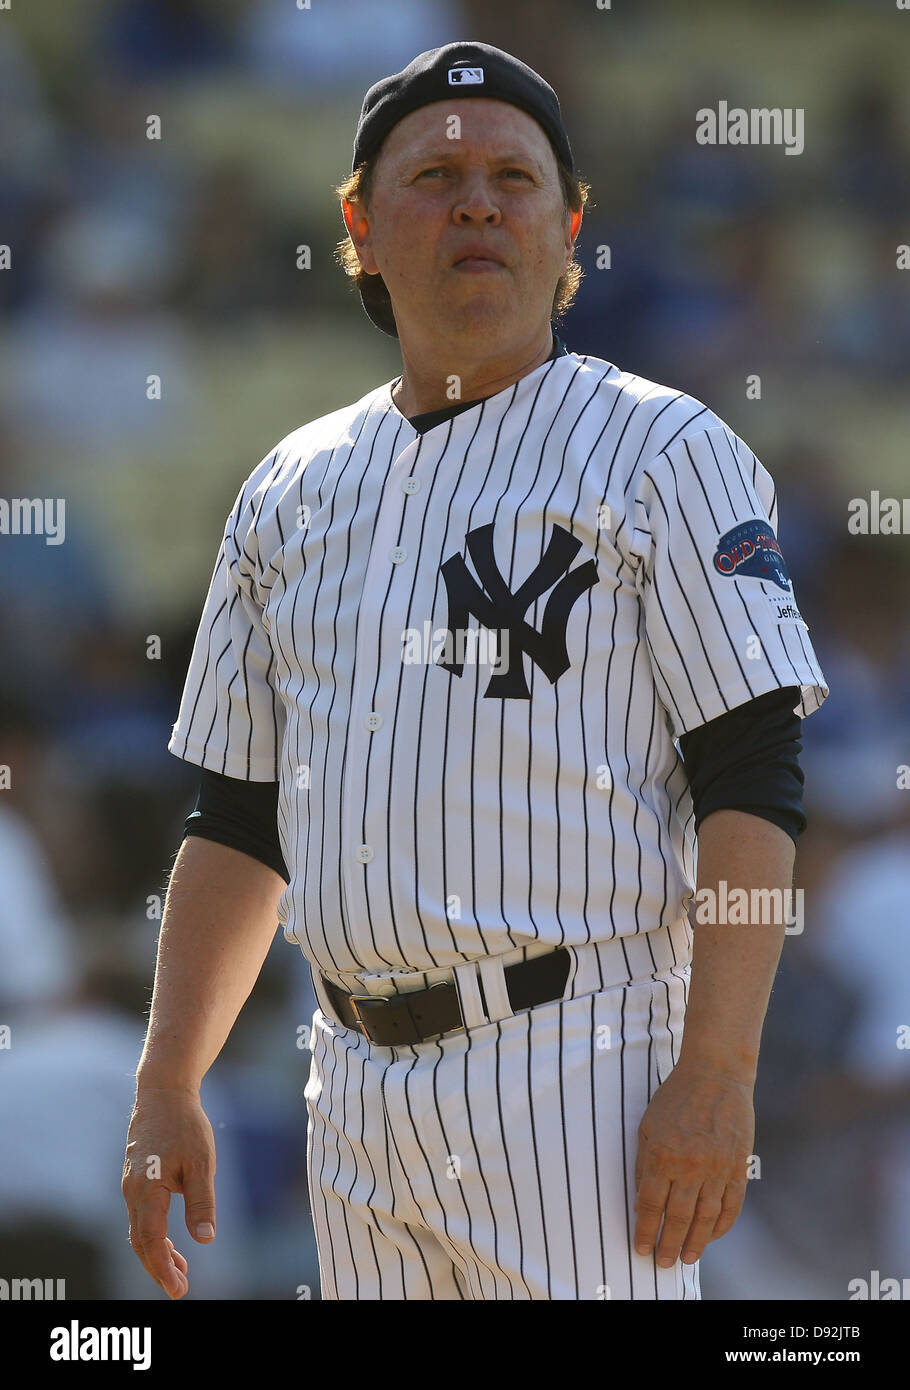 LOS ANGELES, CA - JUNE 08: Actor Billy Crystal plays for the New York Yankees against the Los Angeles Dodgers in an Old Timers Stock Photo